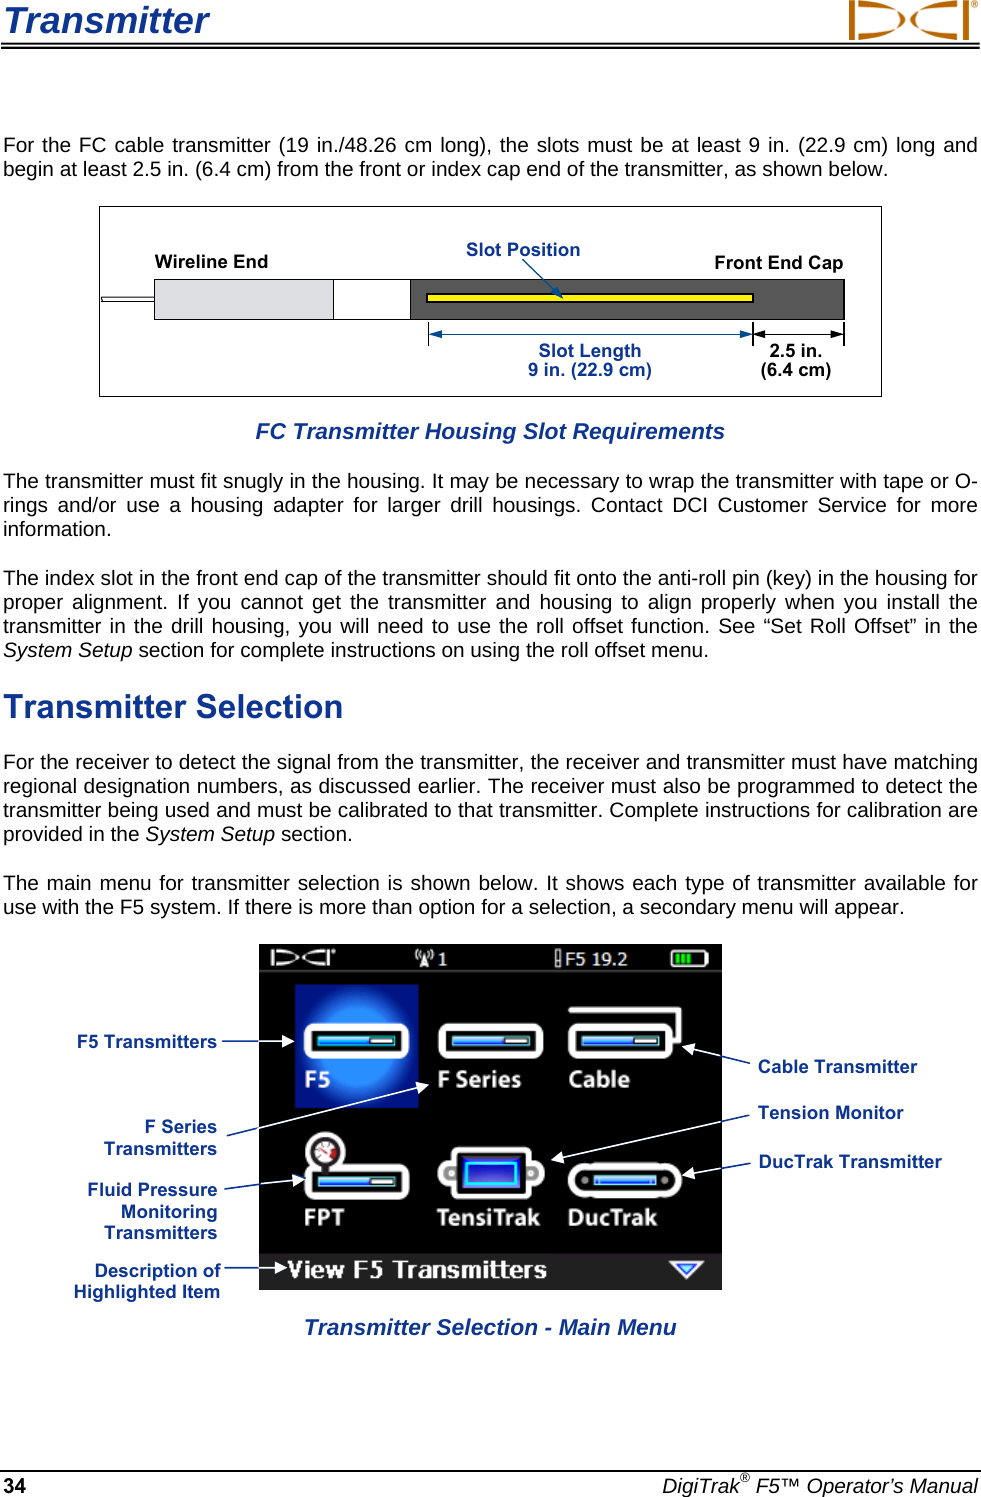 Transmitter     34  DigiTrak® F5™ Operator’s Manual For the FC cable transmitter (19 in./48.26 cm long), the slots must be at least 9 in. (22.9 cm) long and begin at least 2.5 in. (6.4 cm) from the front or index cap end of the transmitter, as shown below.  FC Transmitter Housing Slot Requirements The transmitter must fit snugly in the housing. It may be necessary to wrap the transmitter with tape or O-rings and/or use a housing adapter for larger drill housings. Contact DCI Customer Service for more information. The index slot in the front end cap of the transmitter should fit onto the anti-roll pin (key) in the housing for proper alignment. If you cannot get the transmitter and housing to align properly when you install the transmitter in the drill housing, you will need to use the roll offset function. See “Set Roll Offset” in the System Setup section for complete instructions on using the roll offset menu.  Transmitter Selection For the receiver to detect the signal from the transmitter, the receiver and transmitter must have matching regional designation numbers, as discussed earlier. The receiver must also be programmed to detect the transmitter being used and must be calibrated to that transmitter. Complete instructions for calibration are provided in the System Setup section.  The main menu for transmitter selection is shown below. It shows each type of transmitter available for use with the F5 system. If there is more than option for a selection, a secondary menu will appear.     Transmitter Selection - Main Menu Slot Position2.5 in. (6.4 cm) Slot Length9 in. (22.9 cm) Front End Cap Wireline End Description of Highlighted Item Cable TransmitterTension MonitorDucTrak TransmitterF5 Transmitters F Series Transmitters  Fluid Pressure Monitoring Transmitters  